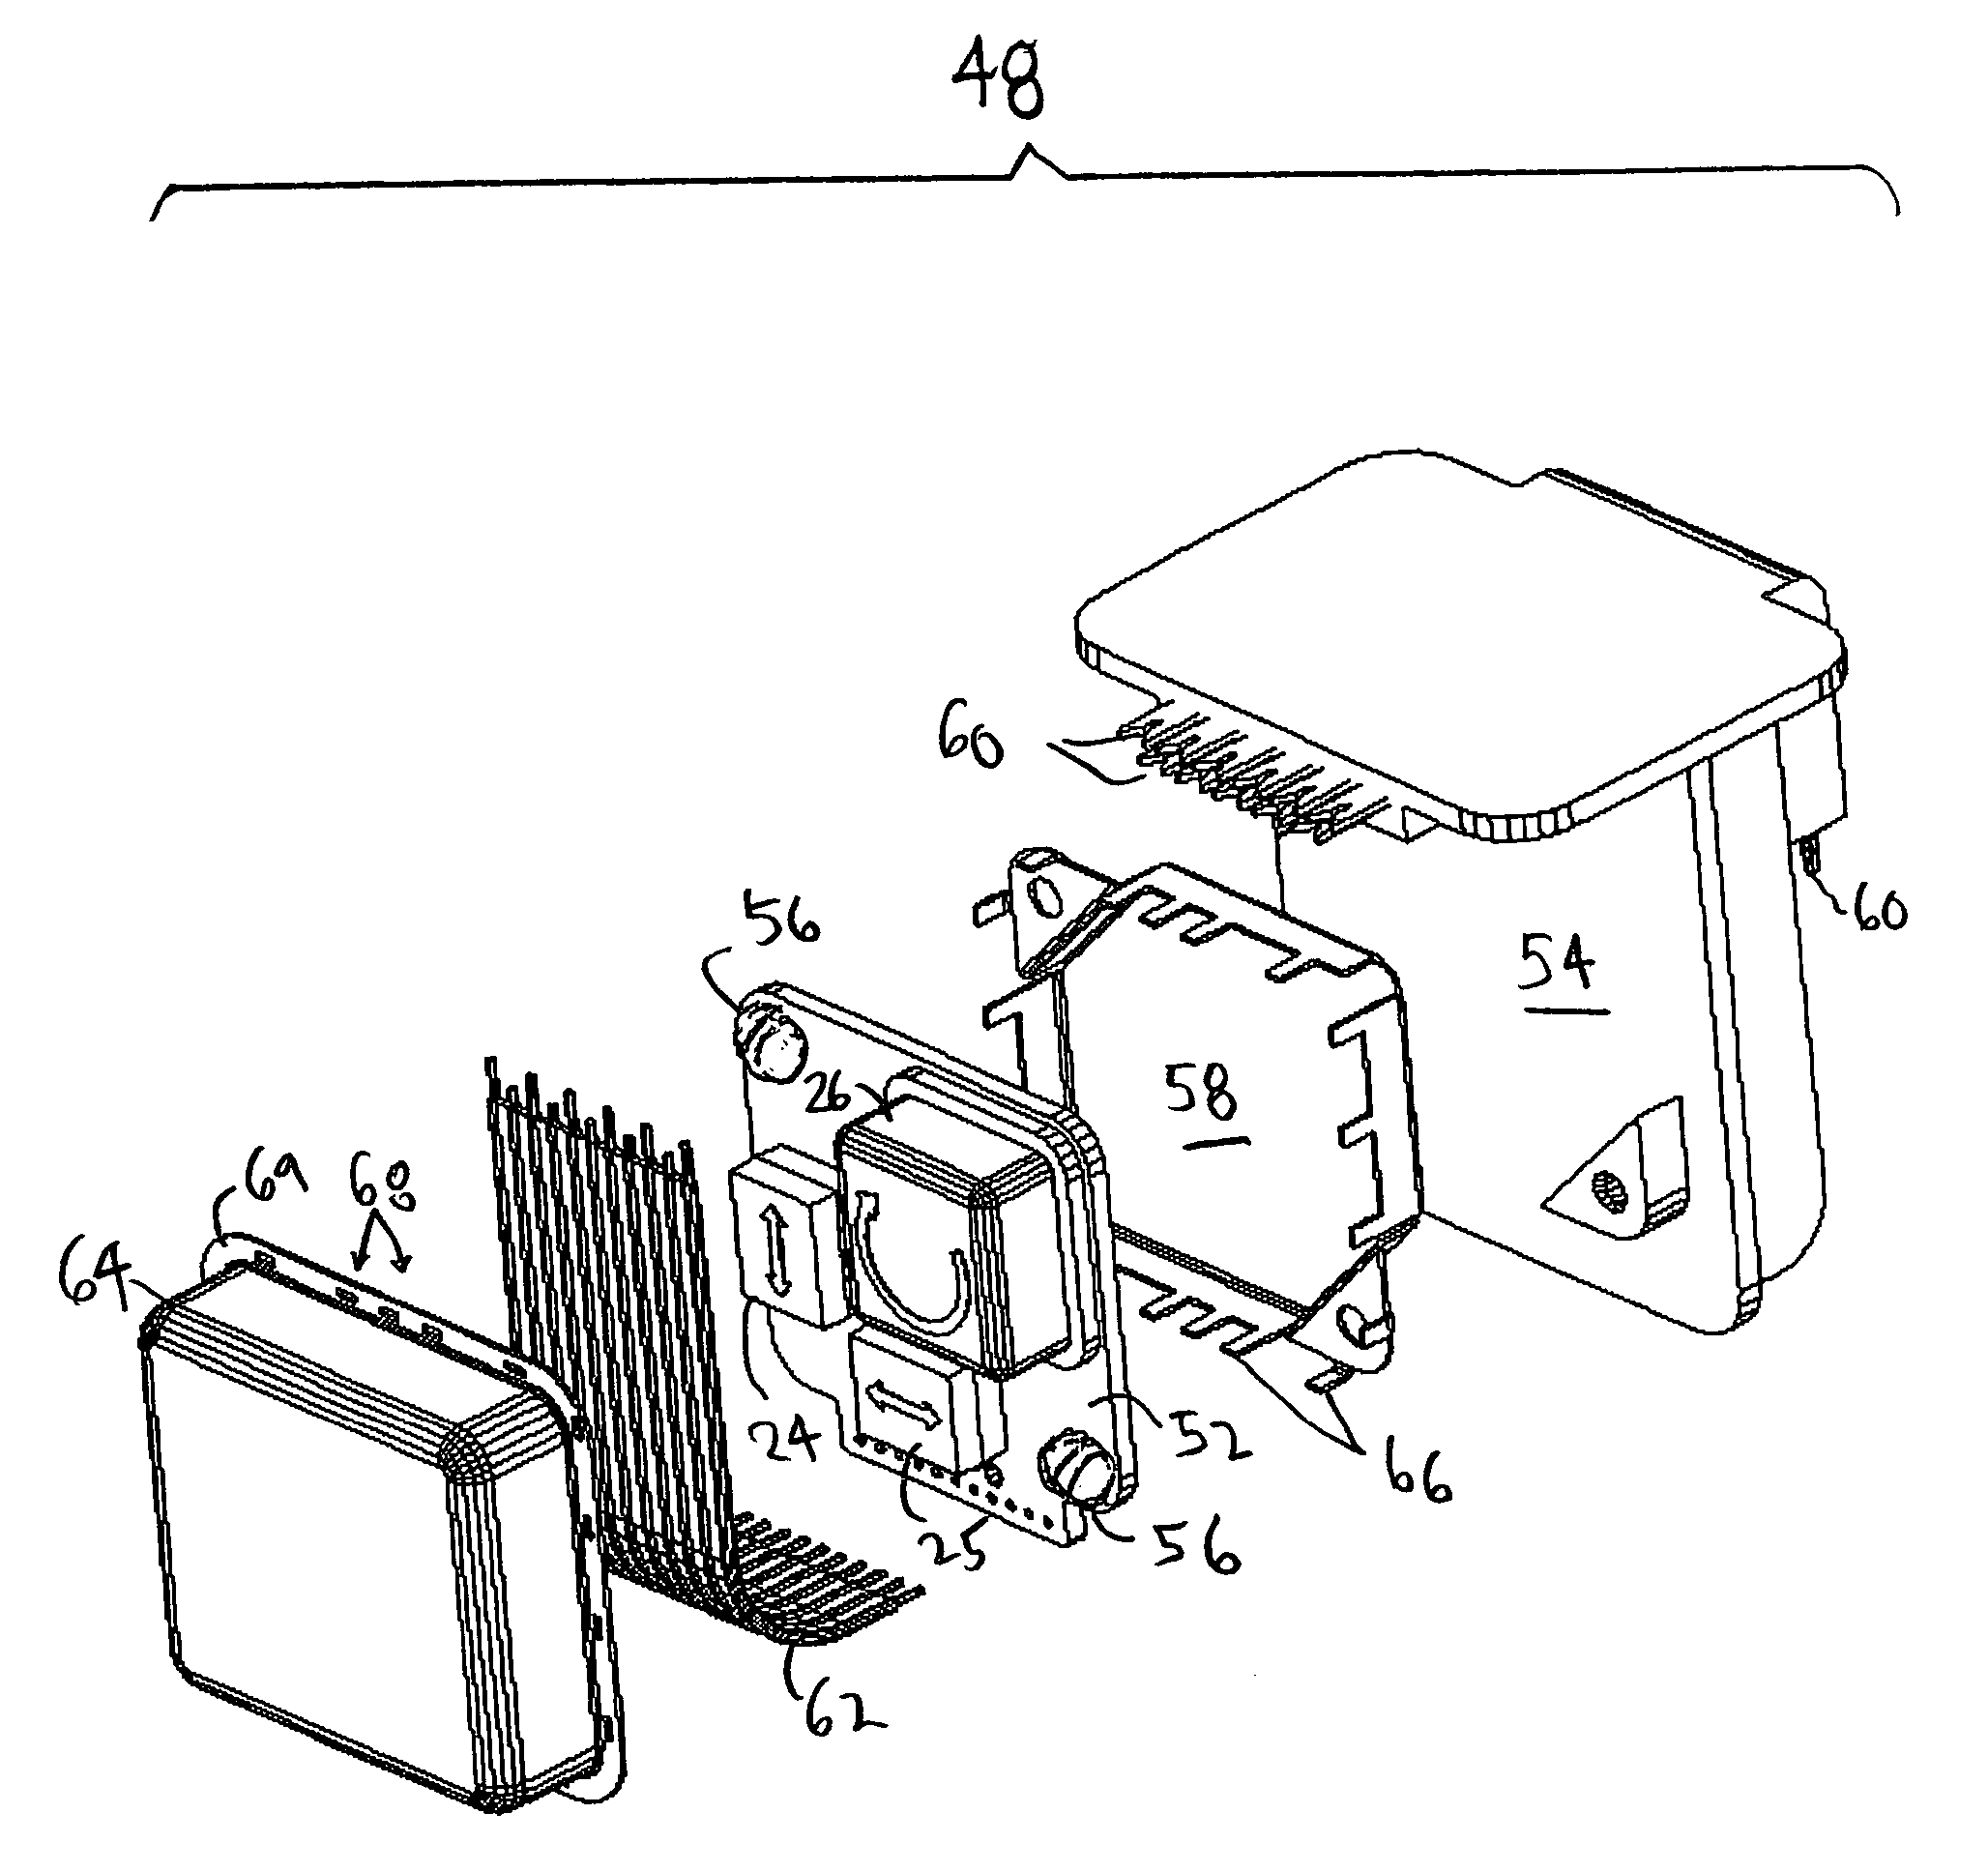 Motion sensors integrated within an electro-hydraulic control unit